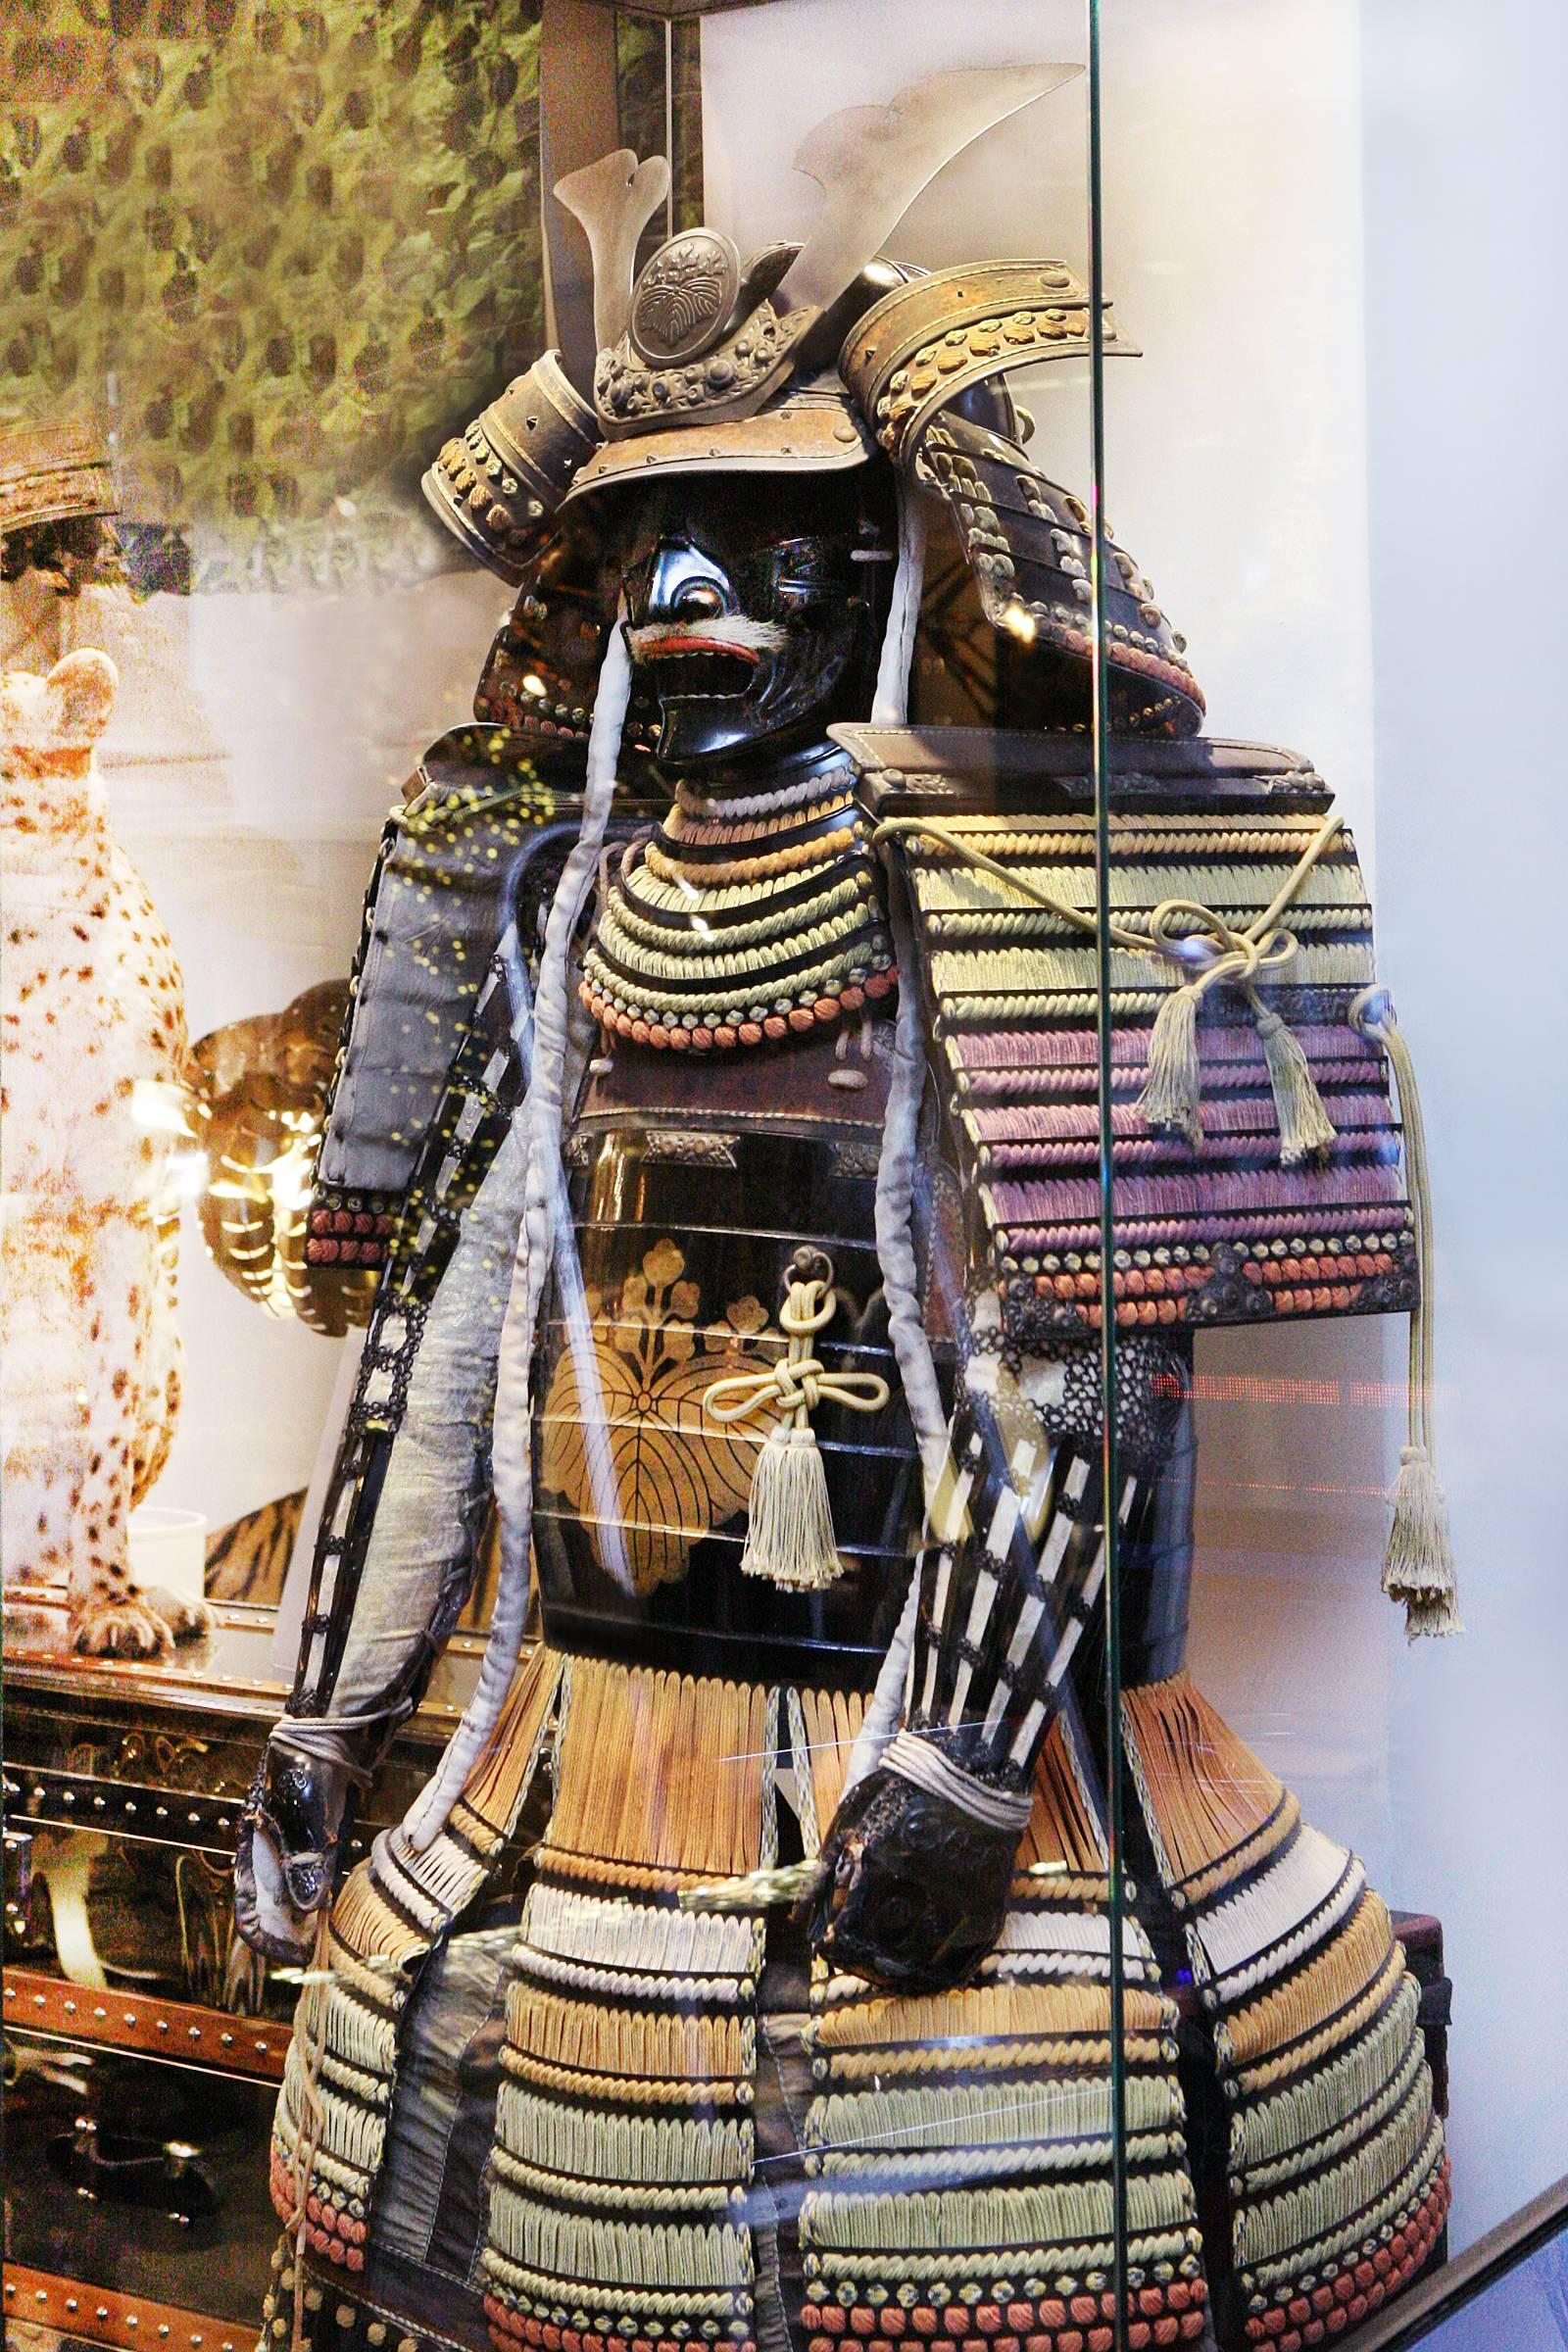 Samourai ceremonial armor, Yoroi Tosei Gusoku,
from Toyotomi family, Kumamoto. From Kyushu 
island. Meiji era (1868-1912). More than 100 years.
In very good condition. Under Led light glass box
included.
Armor: L 70 x D 45 x H 147cm.
Glass box: L 80